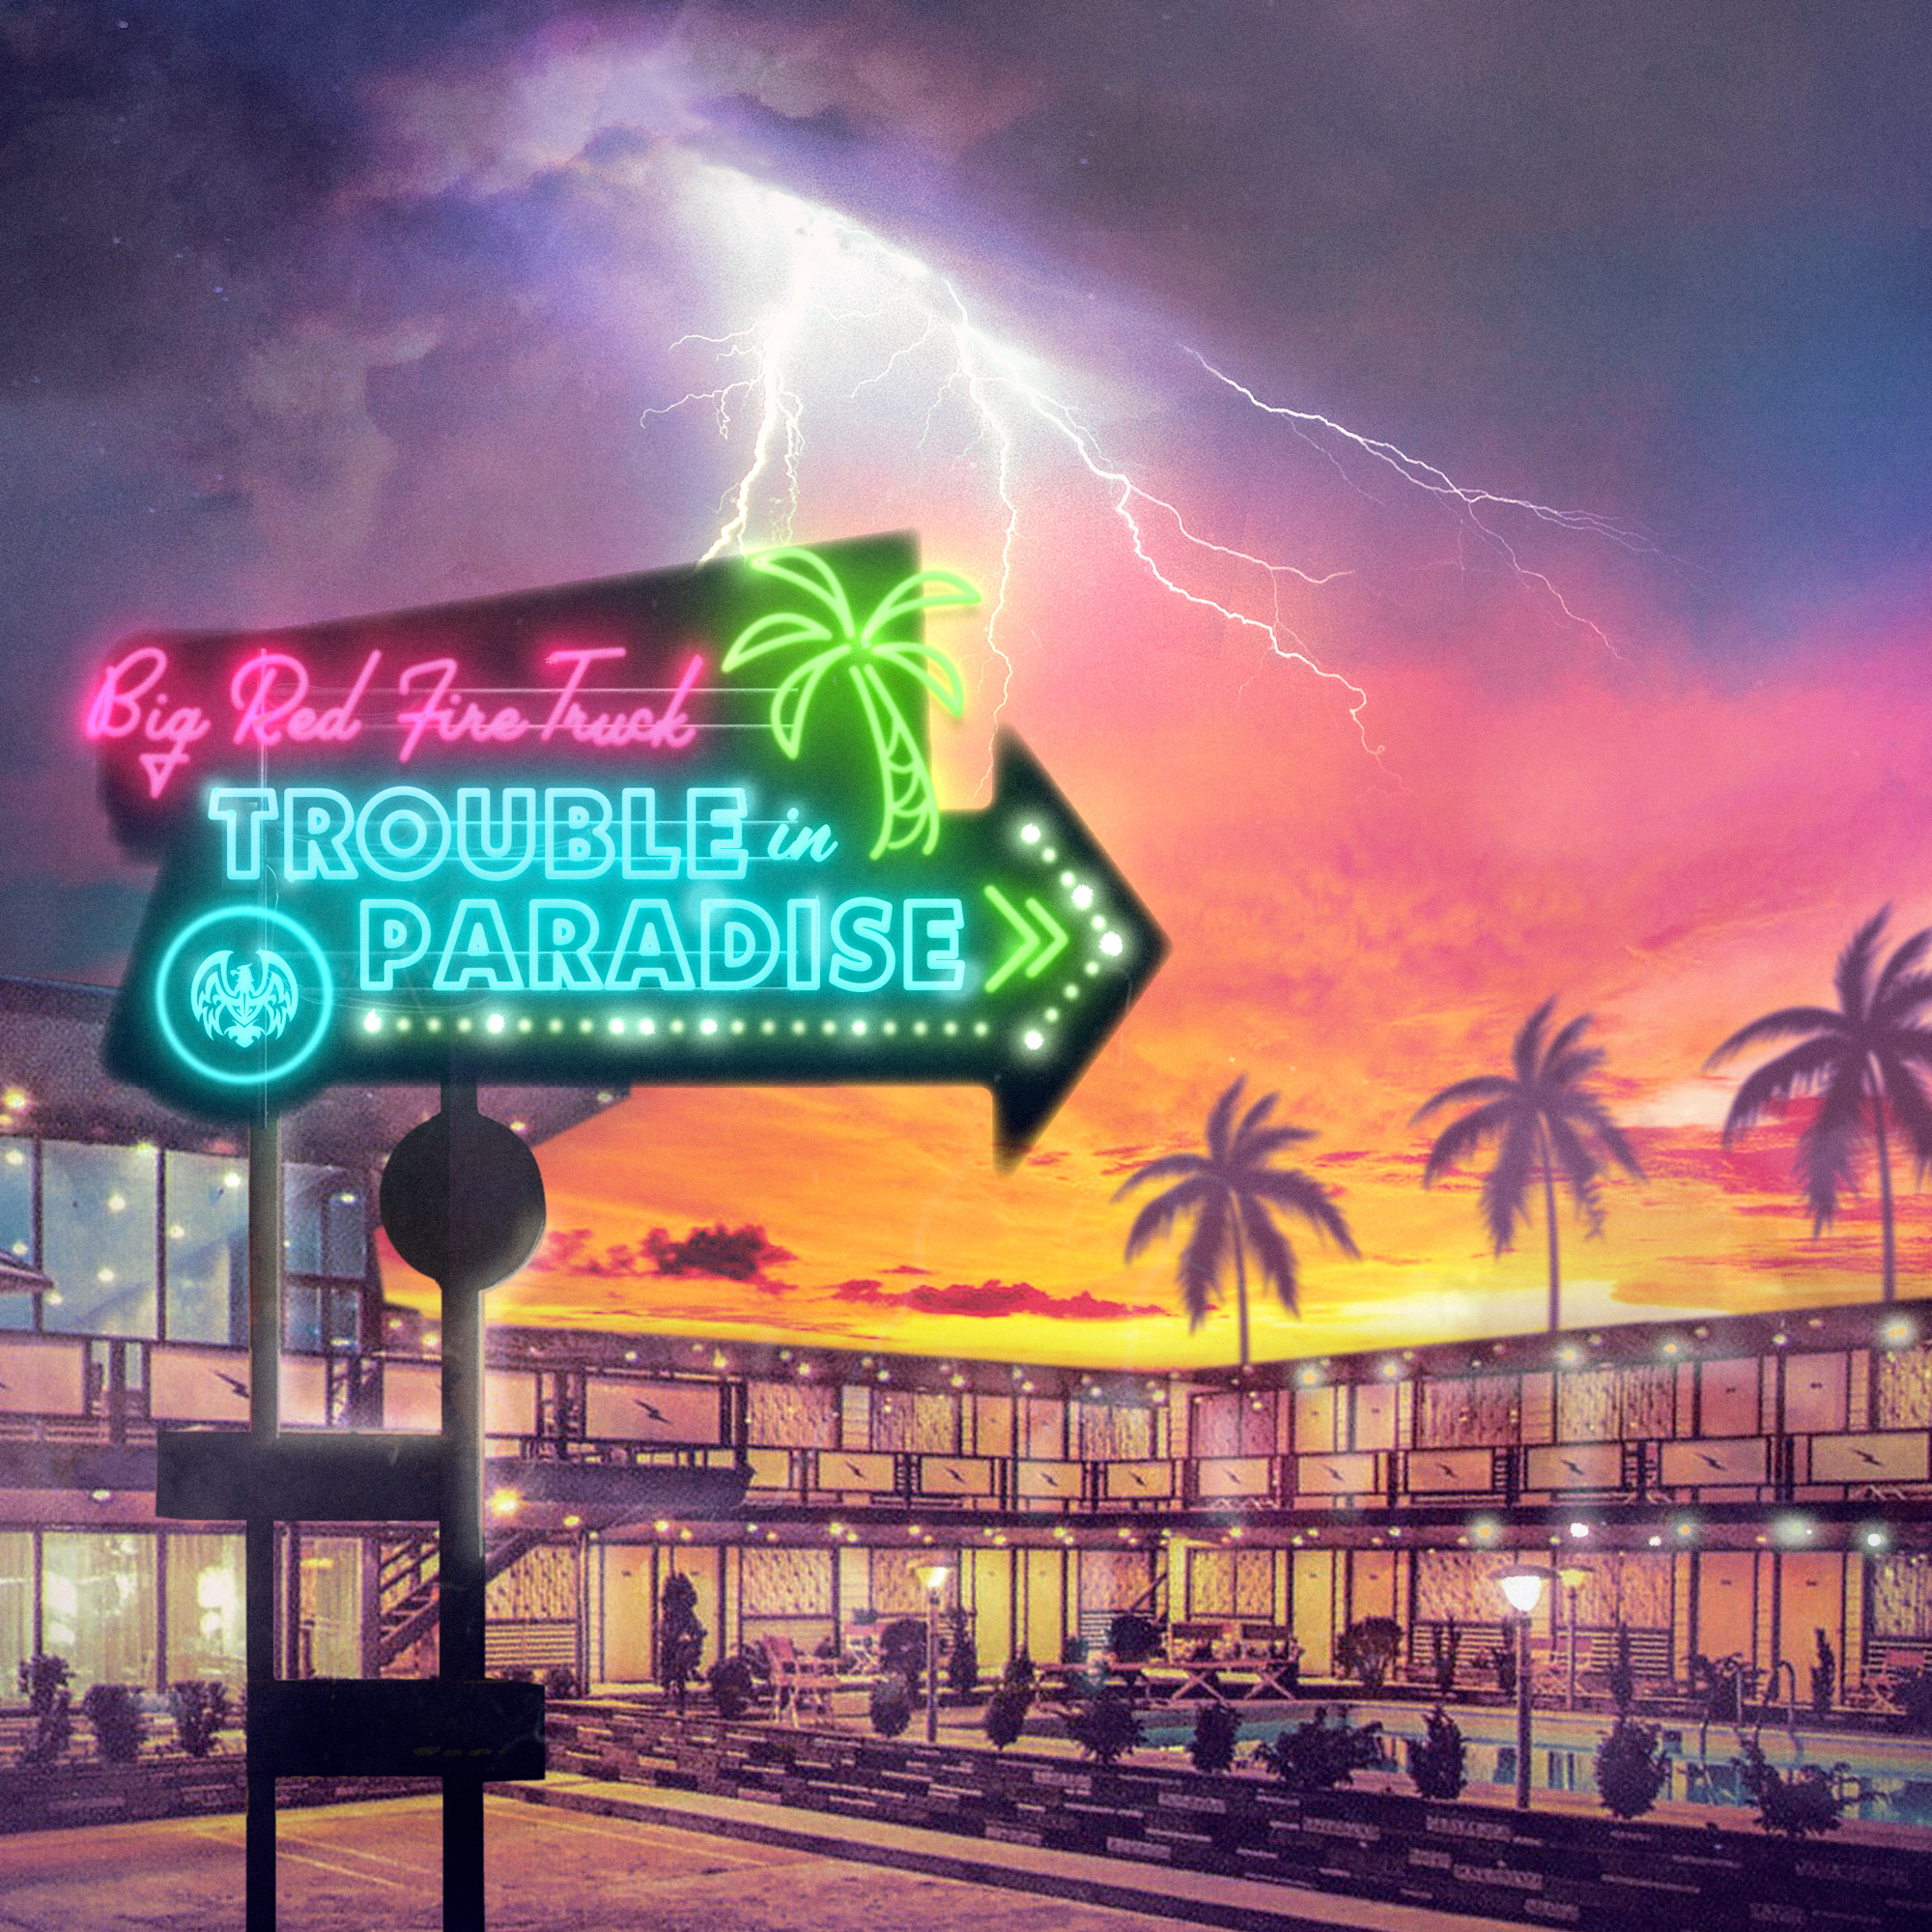 EP REVIEW: Trouble in Paradise by Big Red Fire Truck